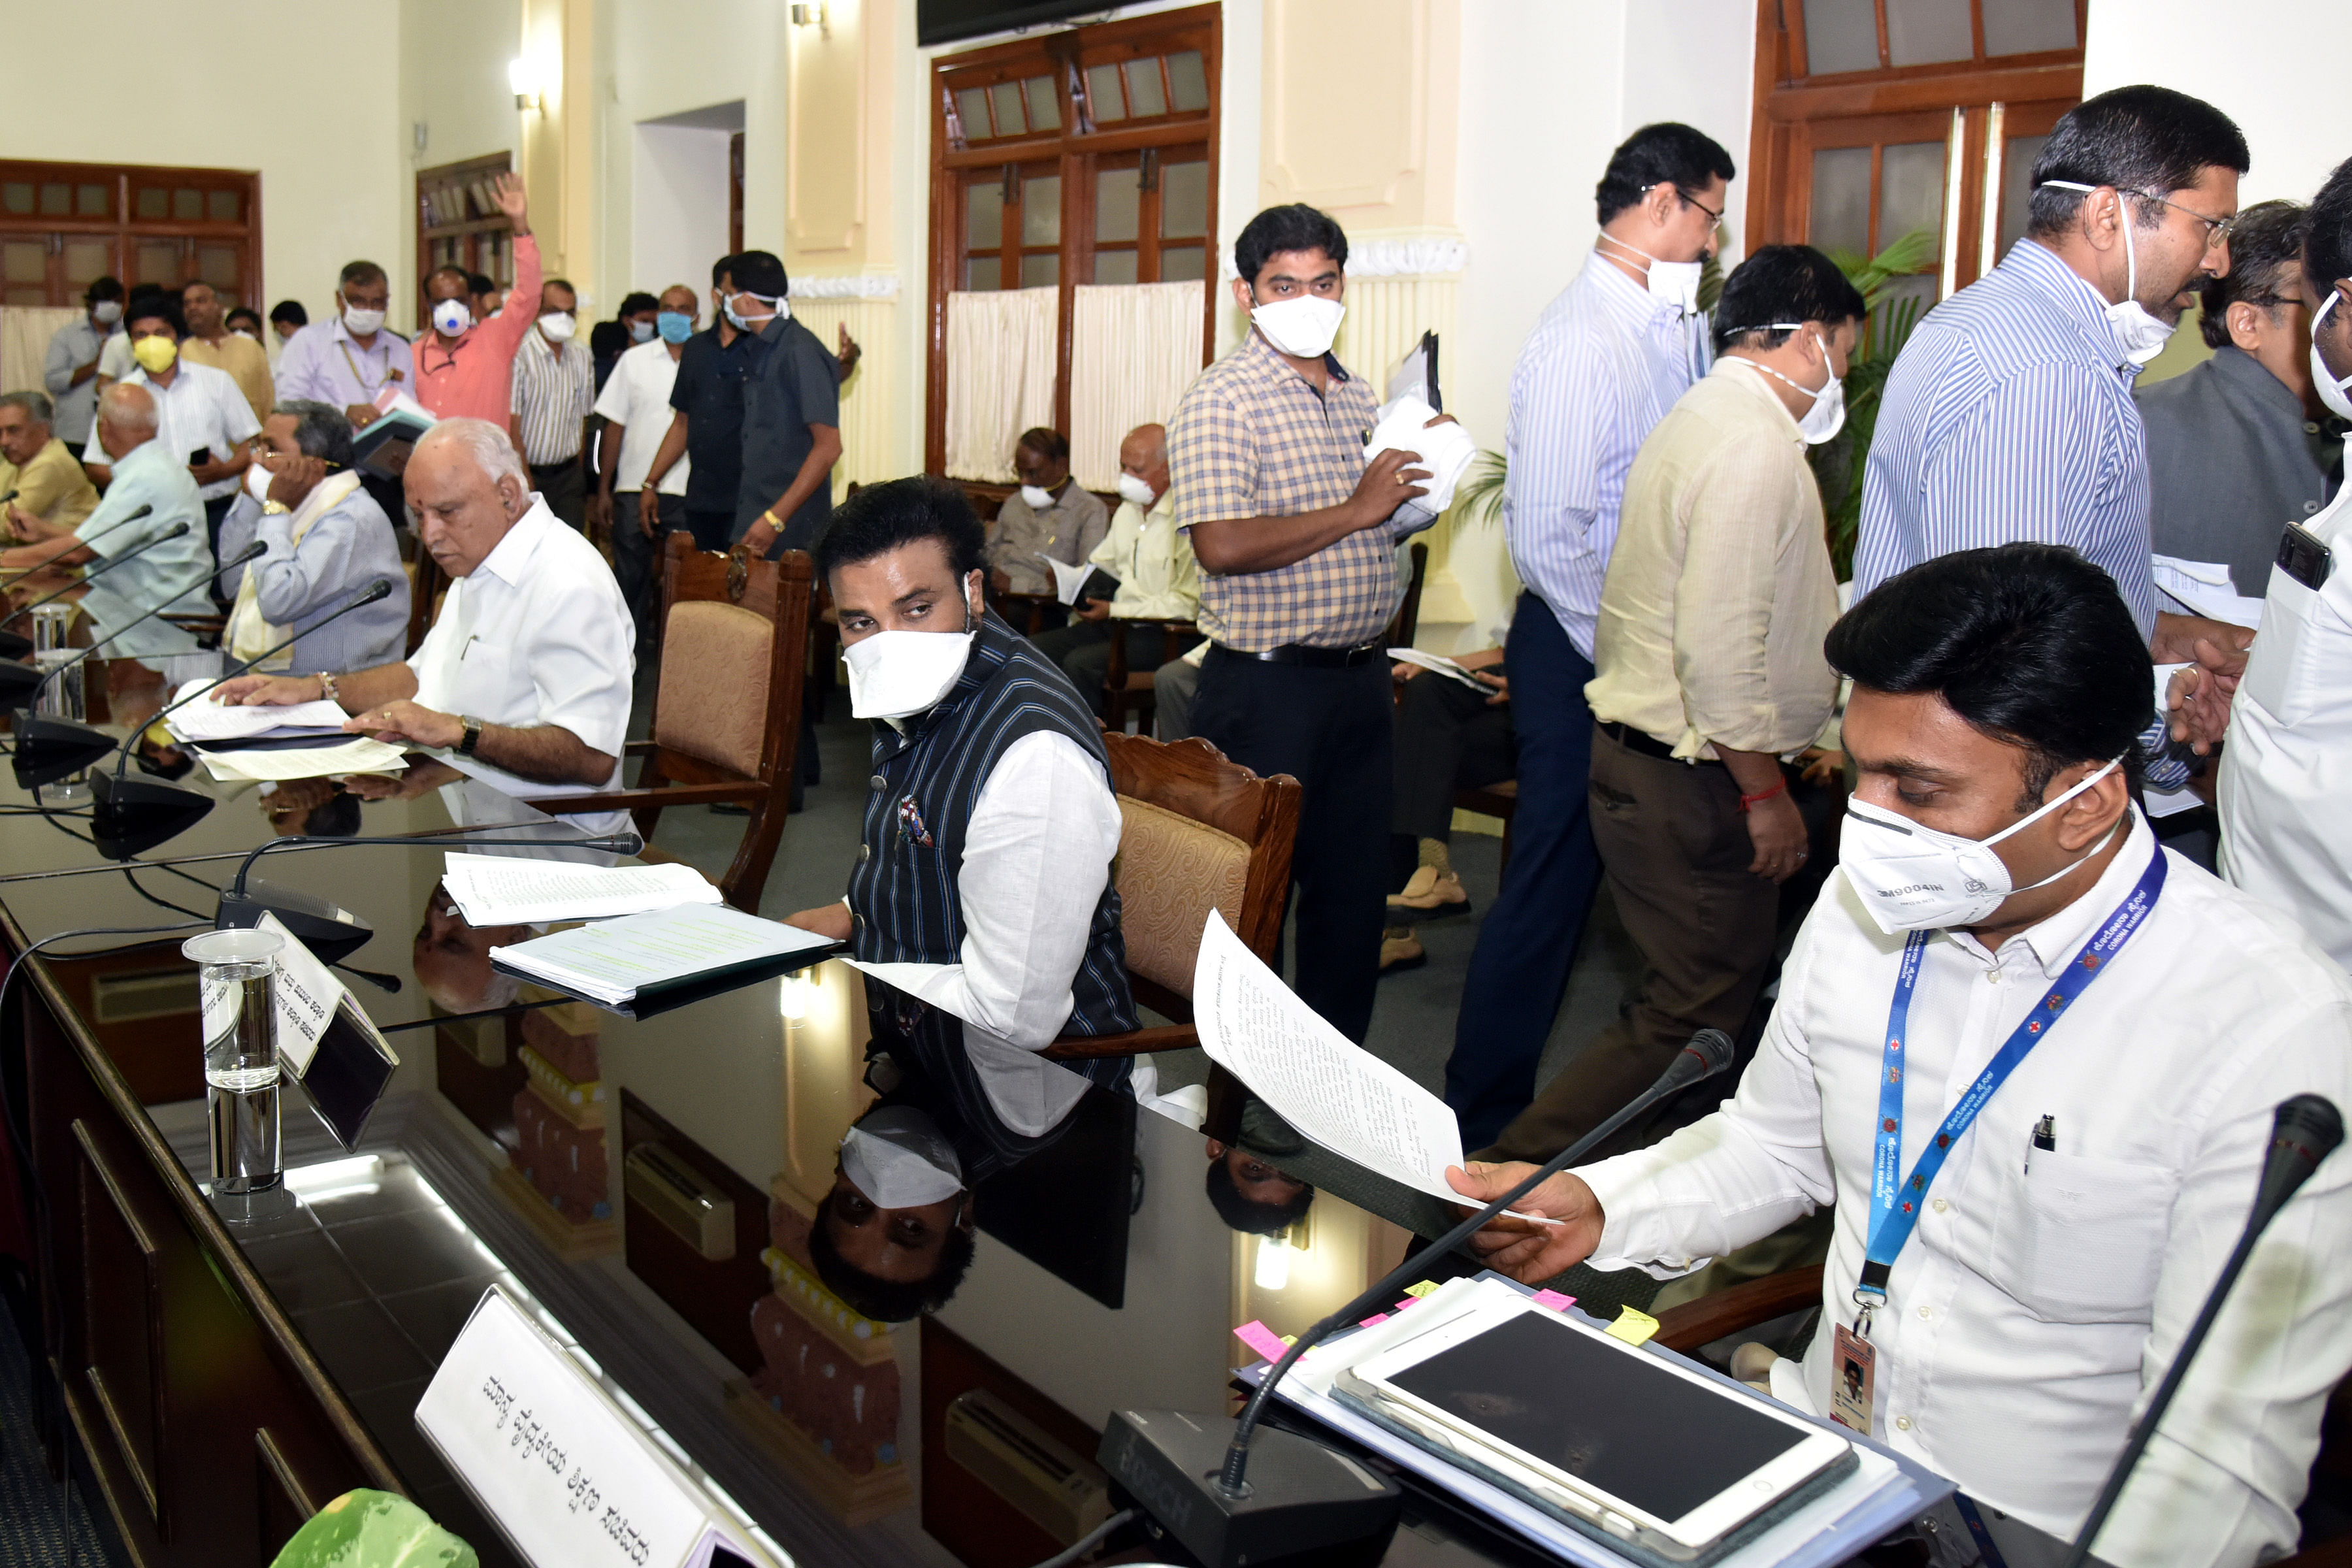 B S Yediyurappa, Chief Minister charing all party meeting discussion on prevention of Caronavirus, Covjd-19 lockdown, at Vidhana Soudha in Bengaluru. (DH Photo)